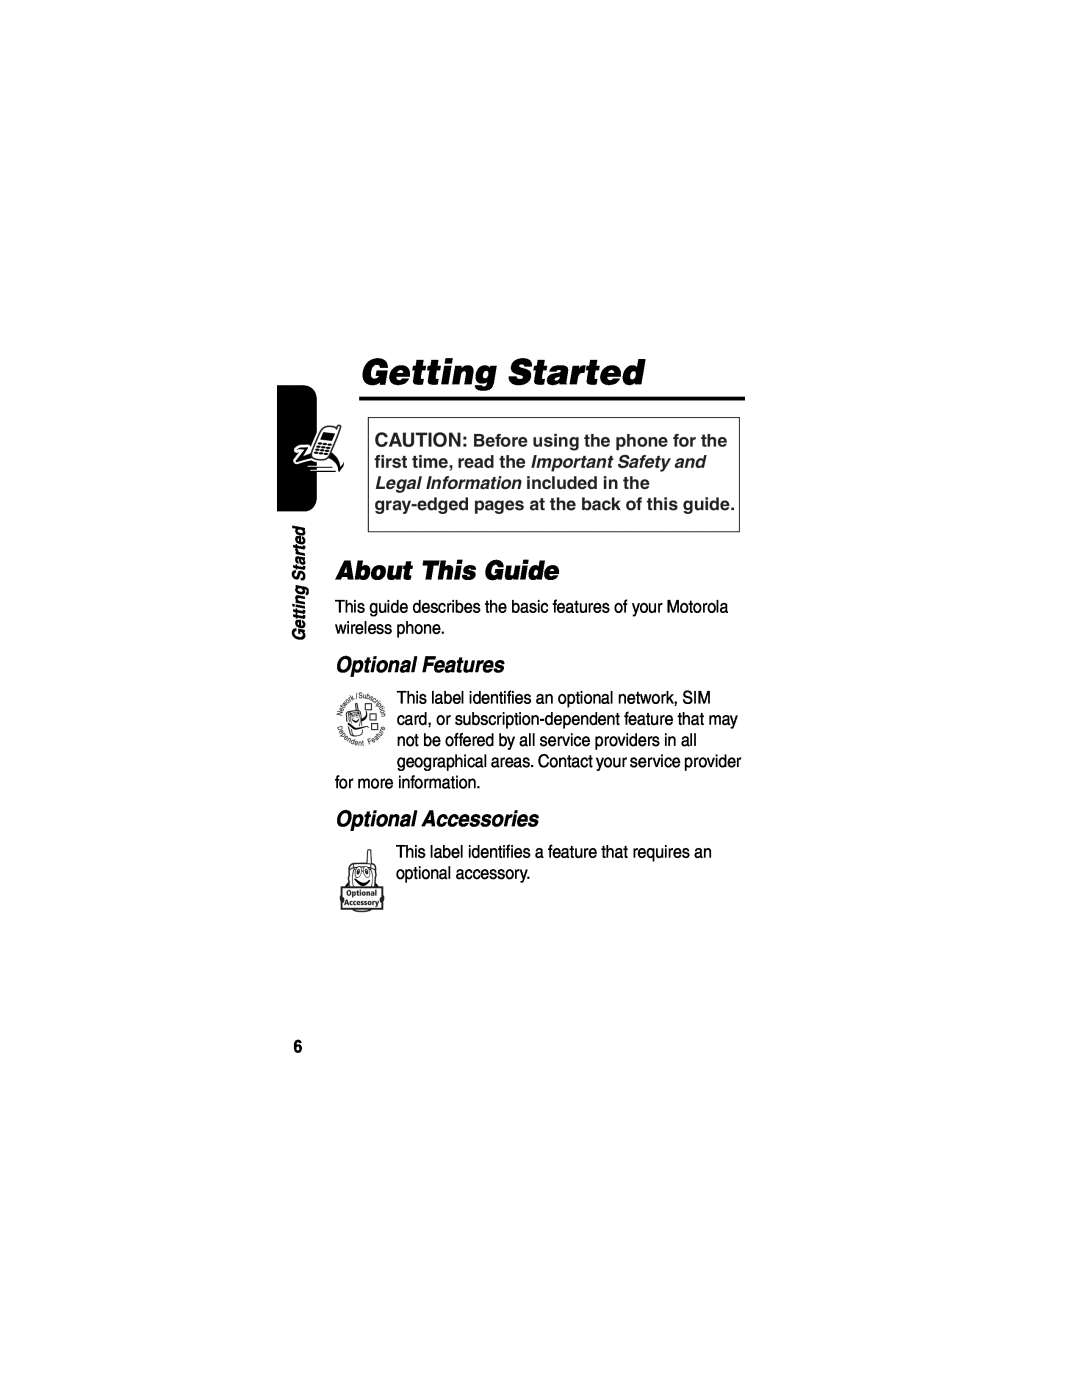 Motorola V635 manual Getting Started, About This Guide, Optional Features, Optional Accessories 